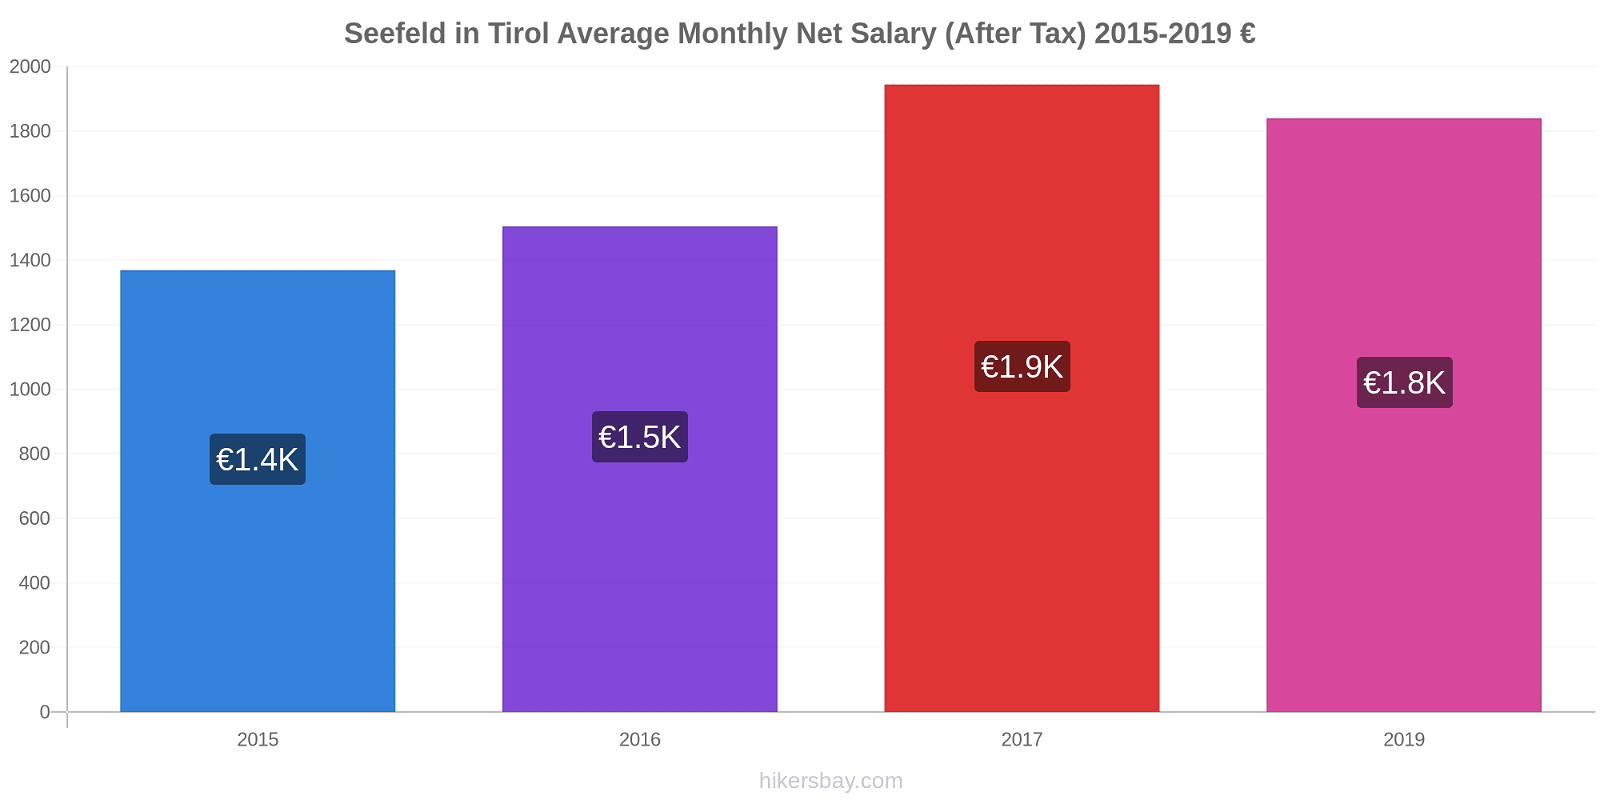 Seefeld in Tirol price changes Average Monthly Net Salary (After Tax) hikersbay.com